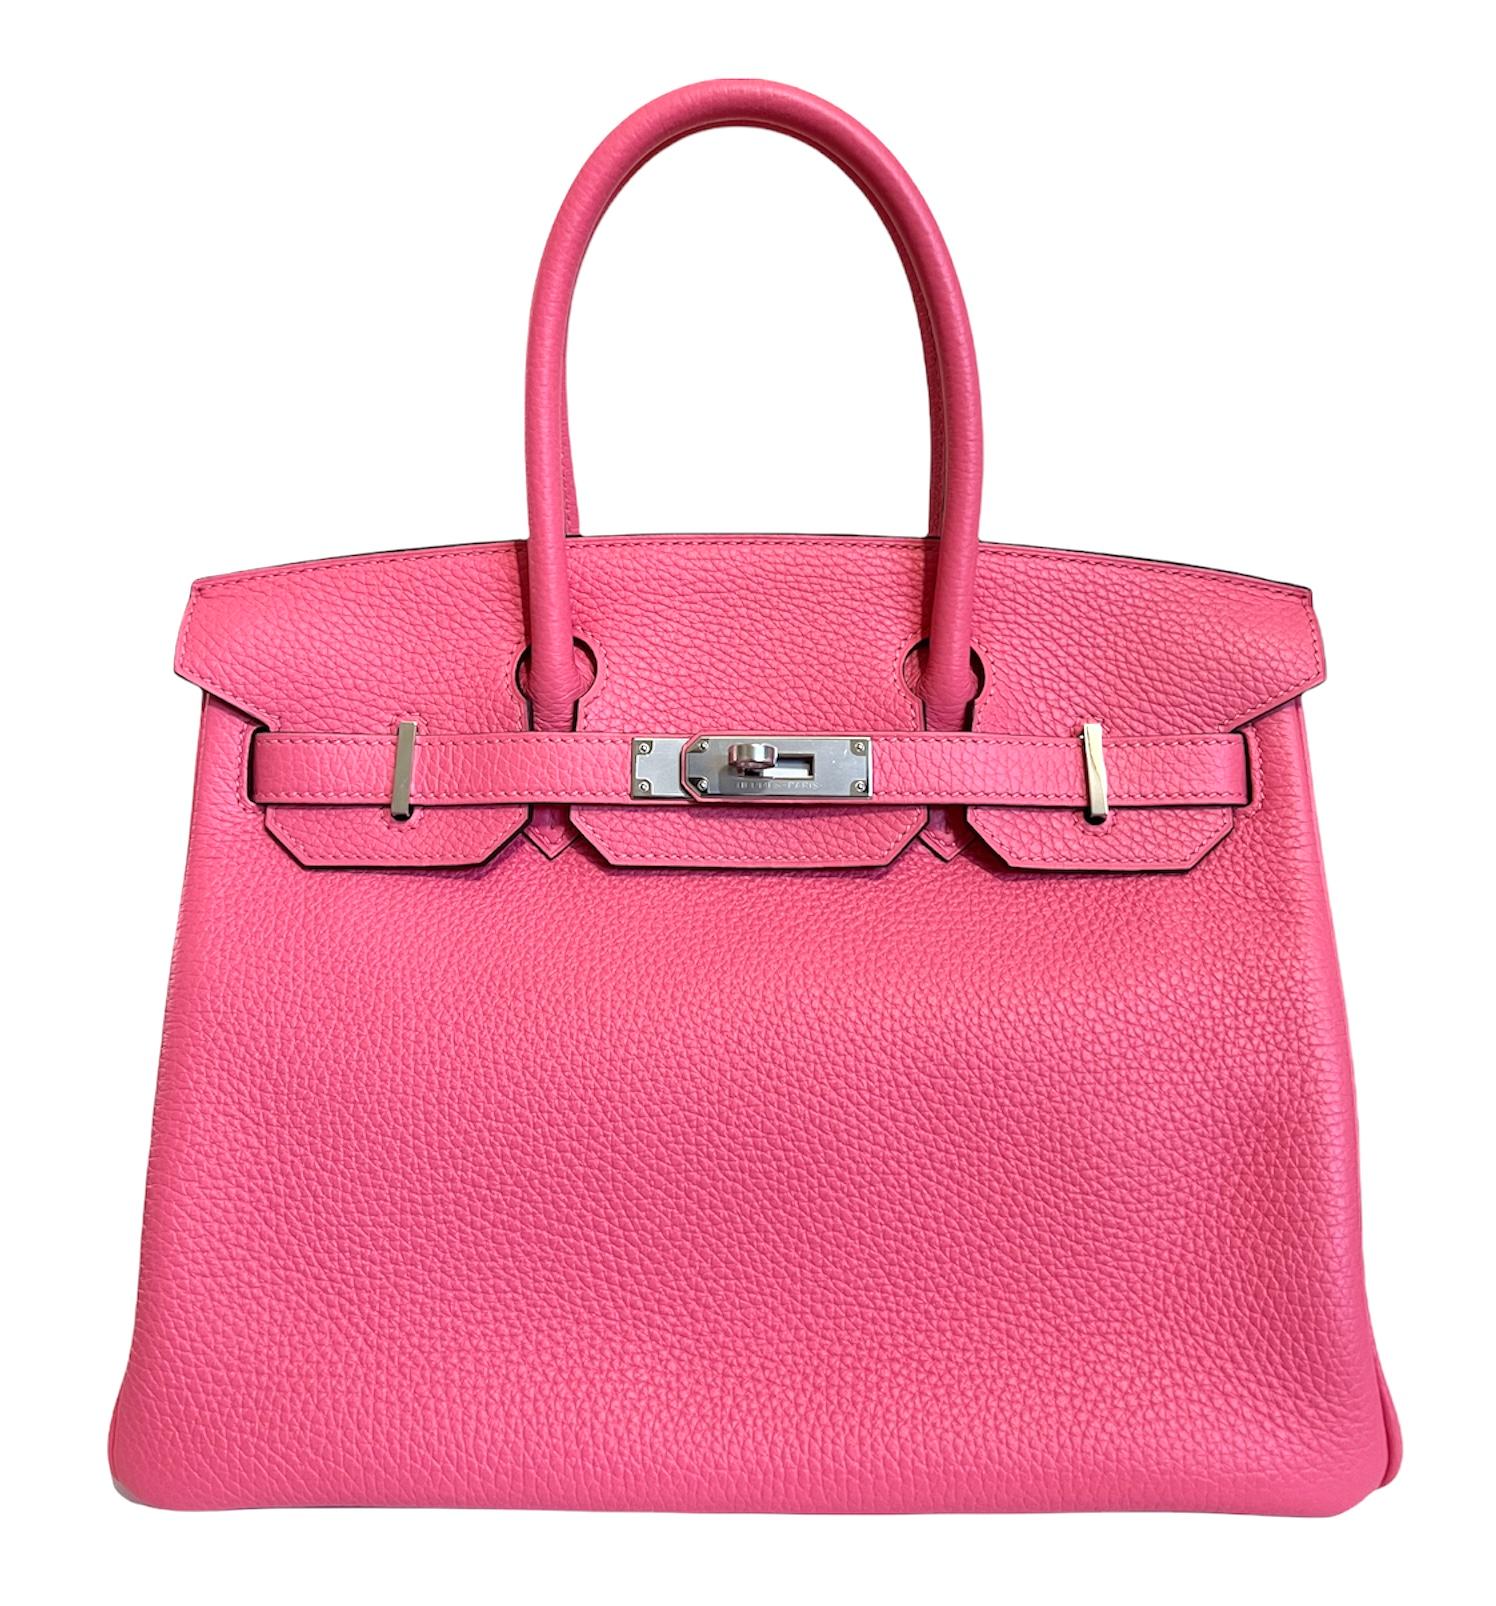 Stunning and Rare New Hermes Birkin 30 Rose Azalee Palladium Hardware. 2020 Y Stamp, includes all accessories and Box. 

Shop with Confidence From Lux Addicts. Authenticity Guaranteed! 
